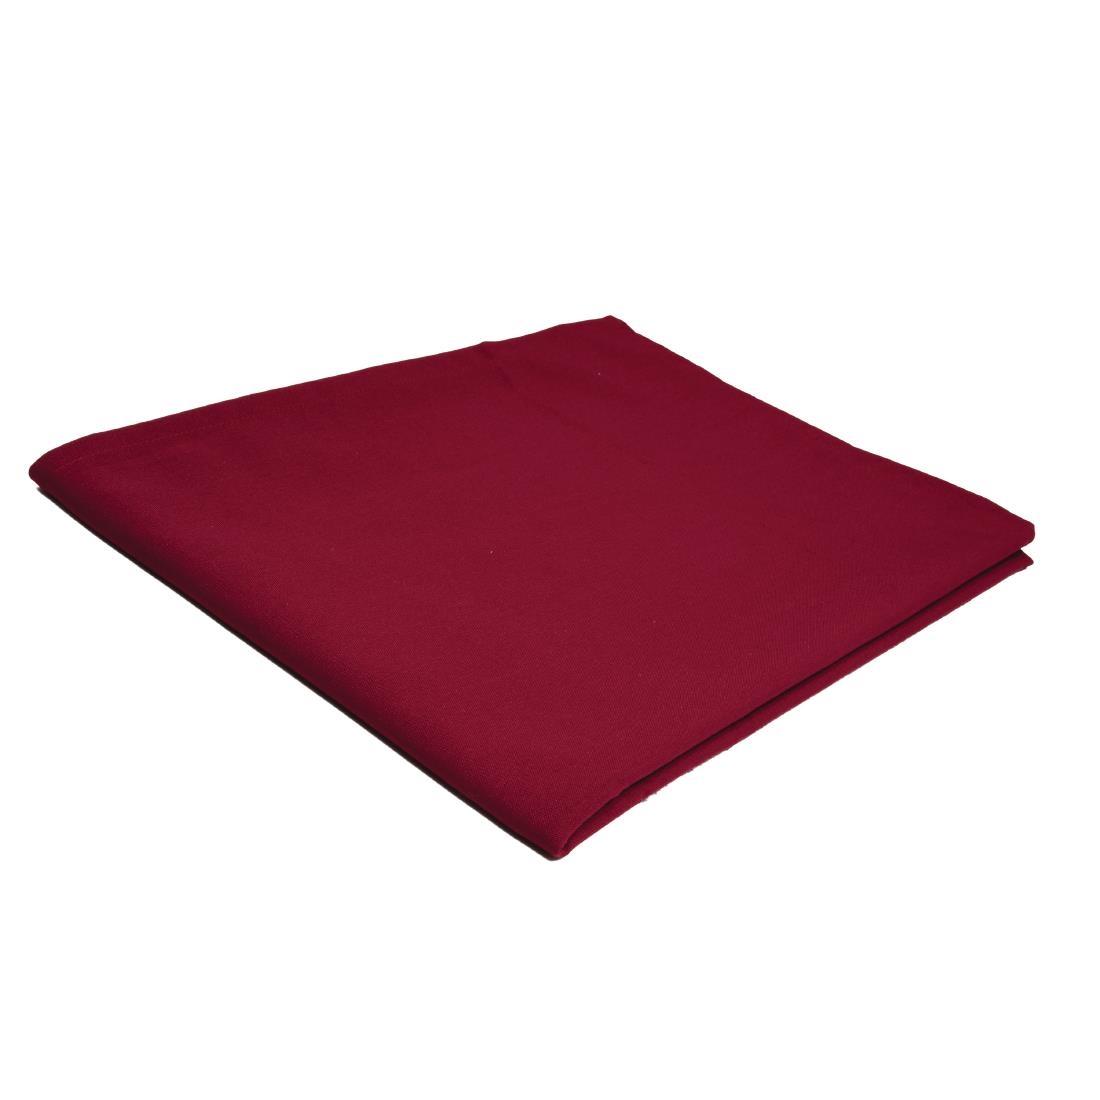 Occasions Tablecloth Burgundy 1350 x 1350mm - HB568  - 3